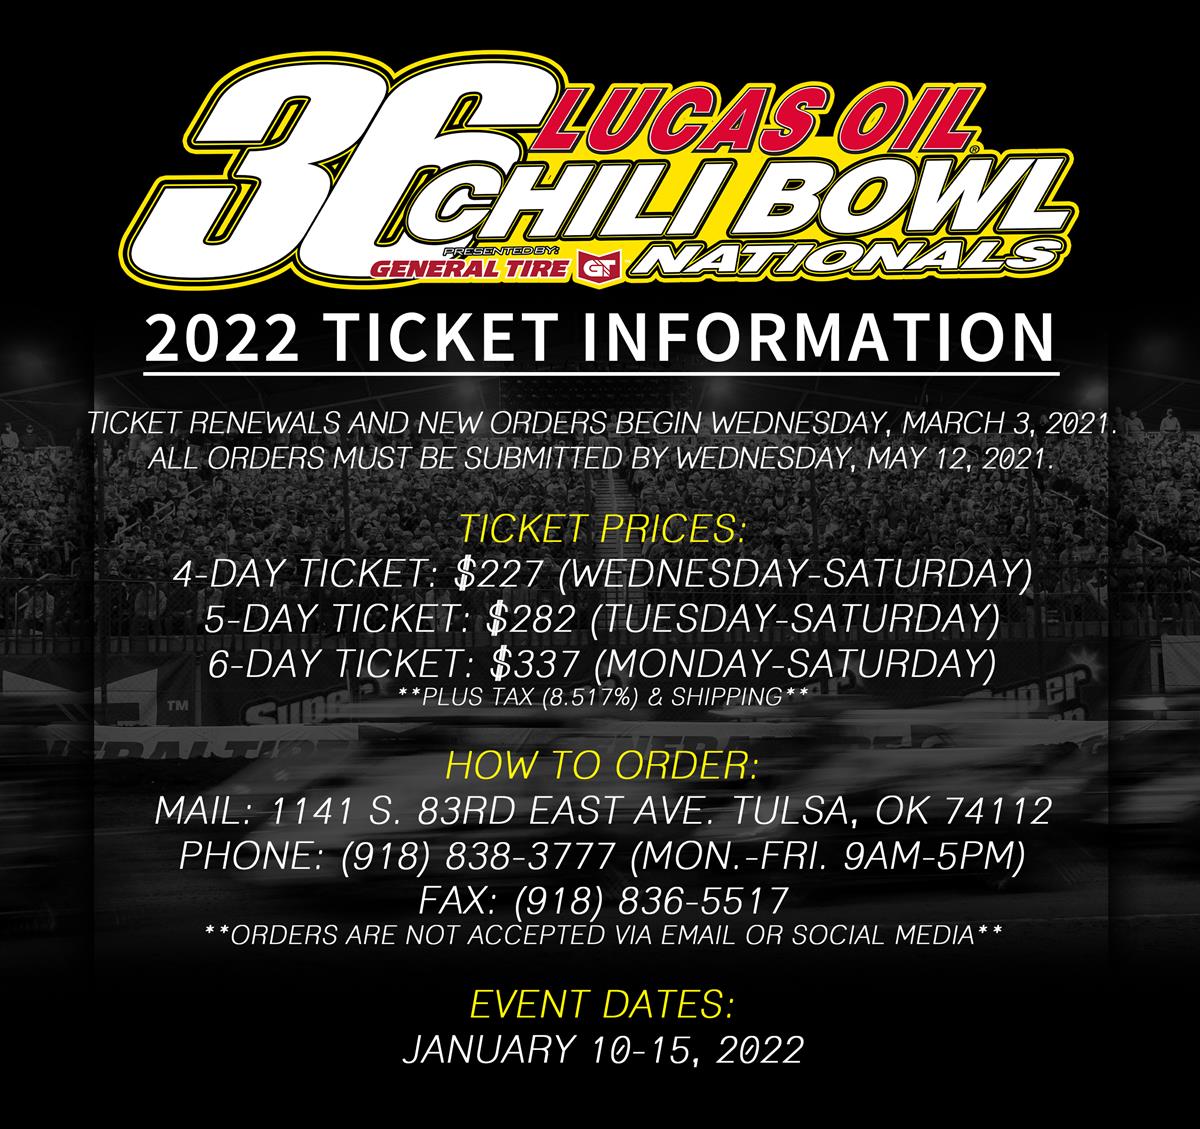 2022 Chili Bowl Ticket Orders Begin March 3, 2021